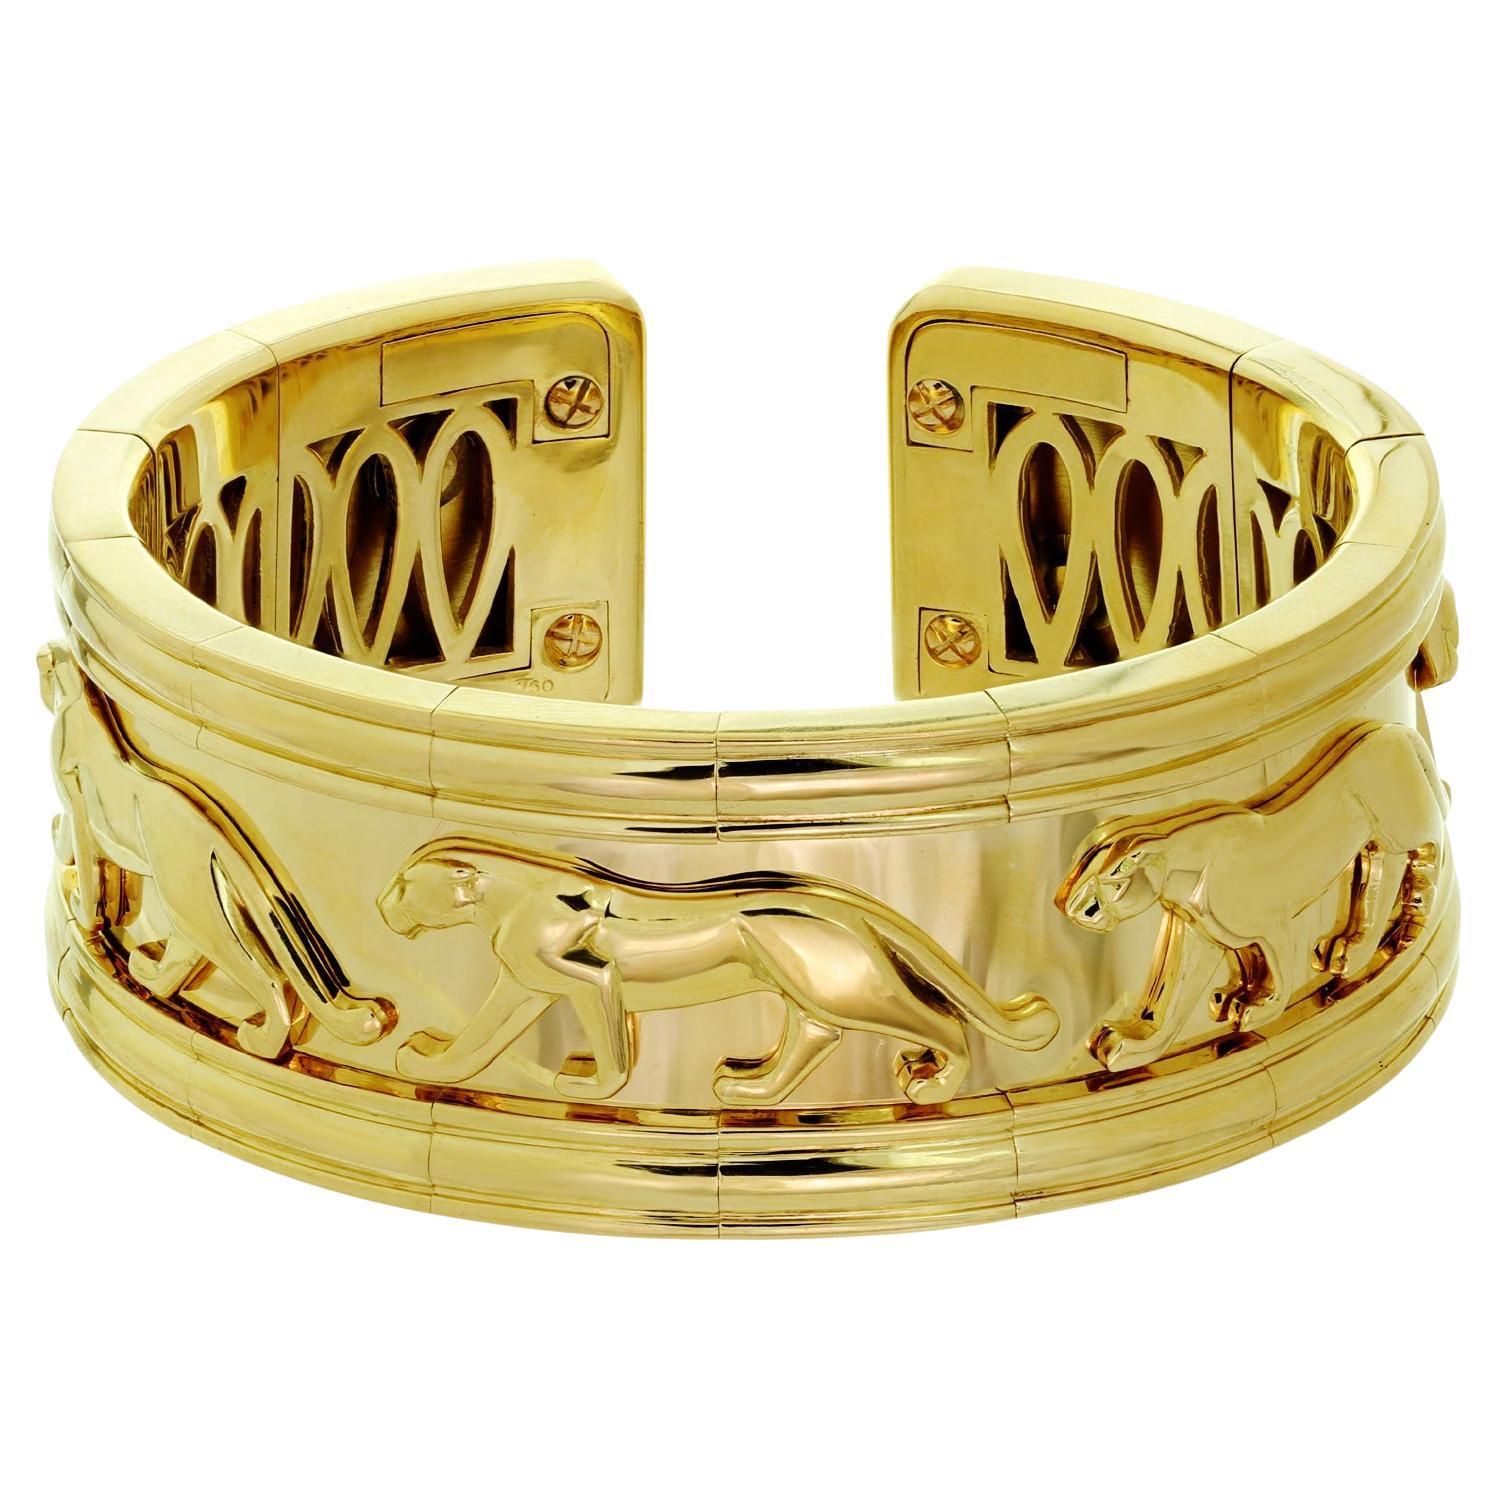 Cartier Panthere 18k Two-Tone Gold Vintage Cuff Bracelet